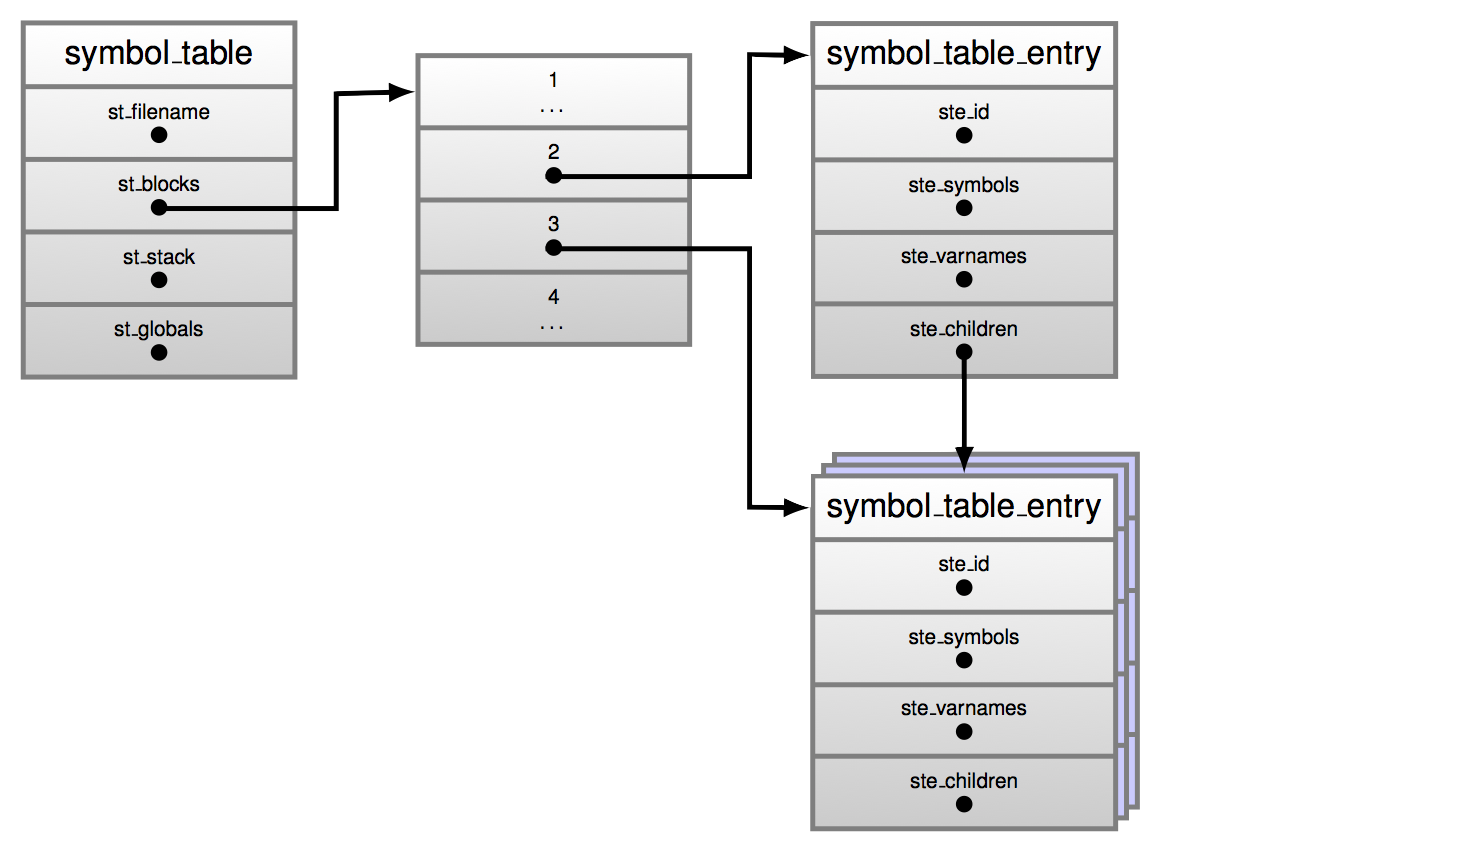 Figure 3.2: A Symbol table and symbol table entries.